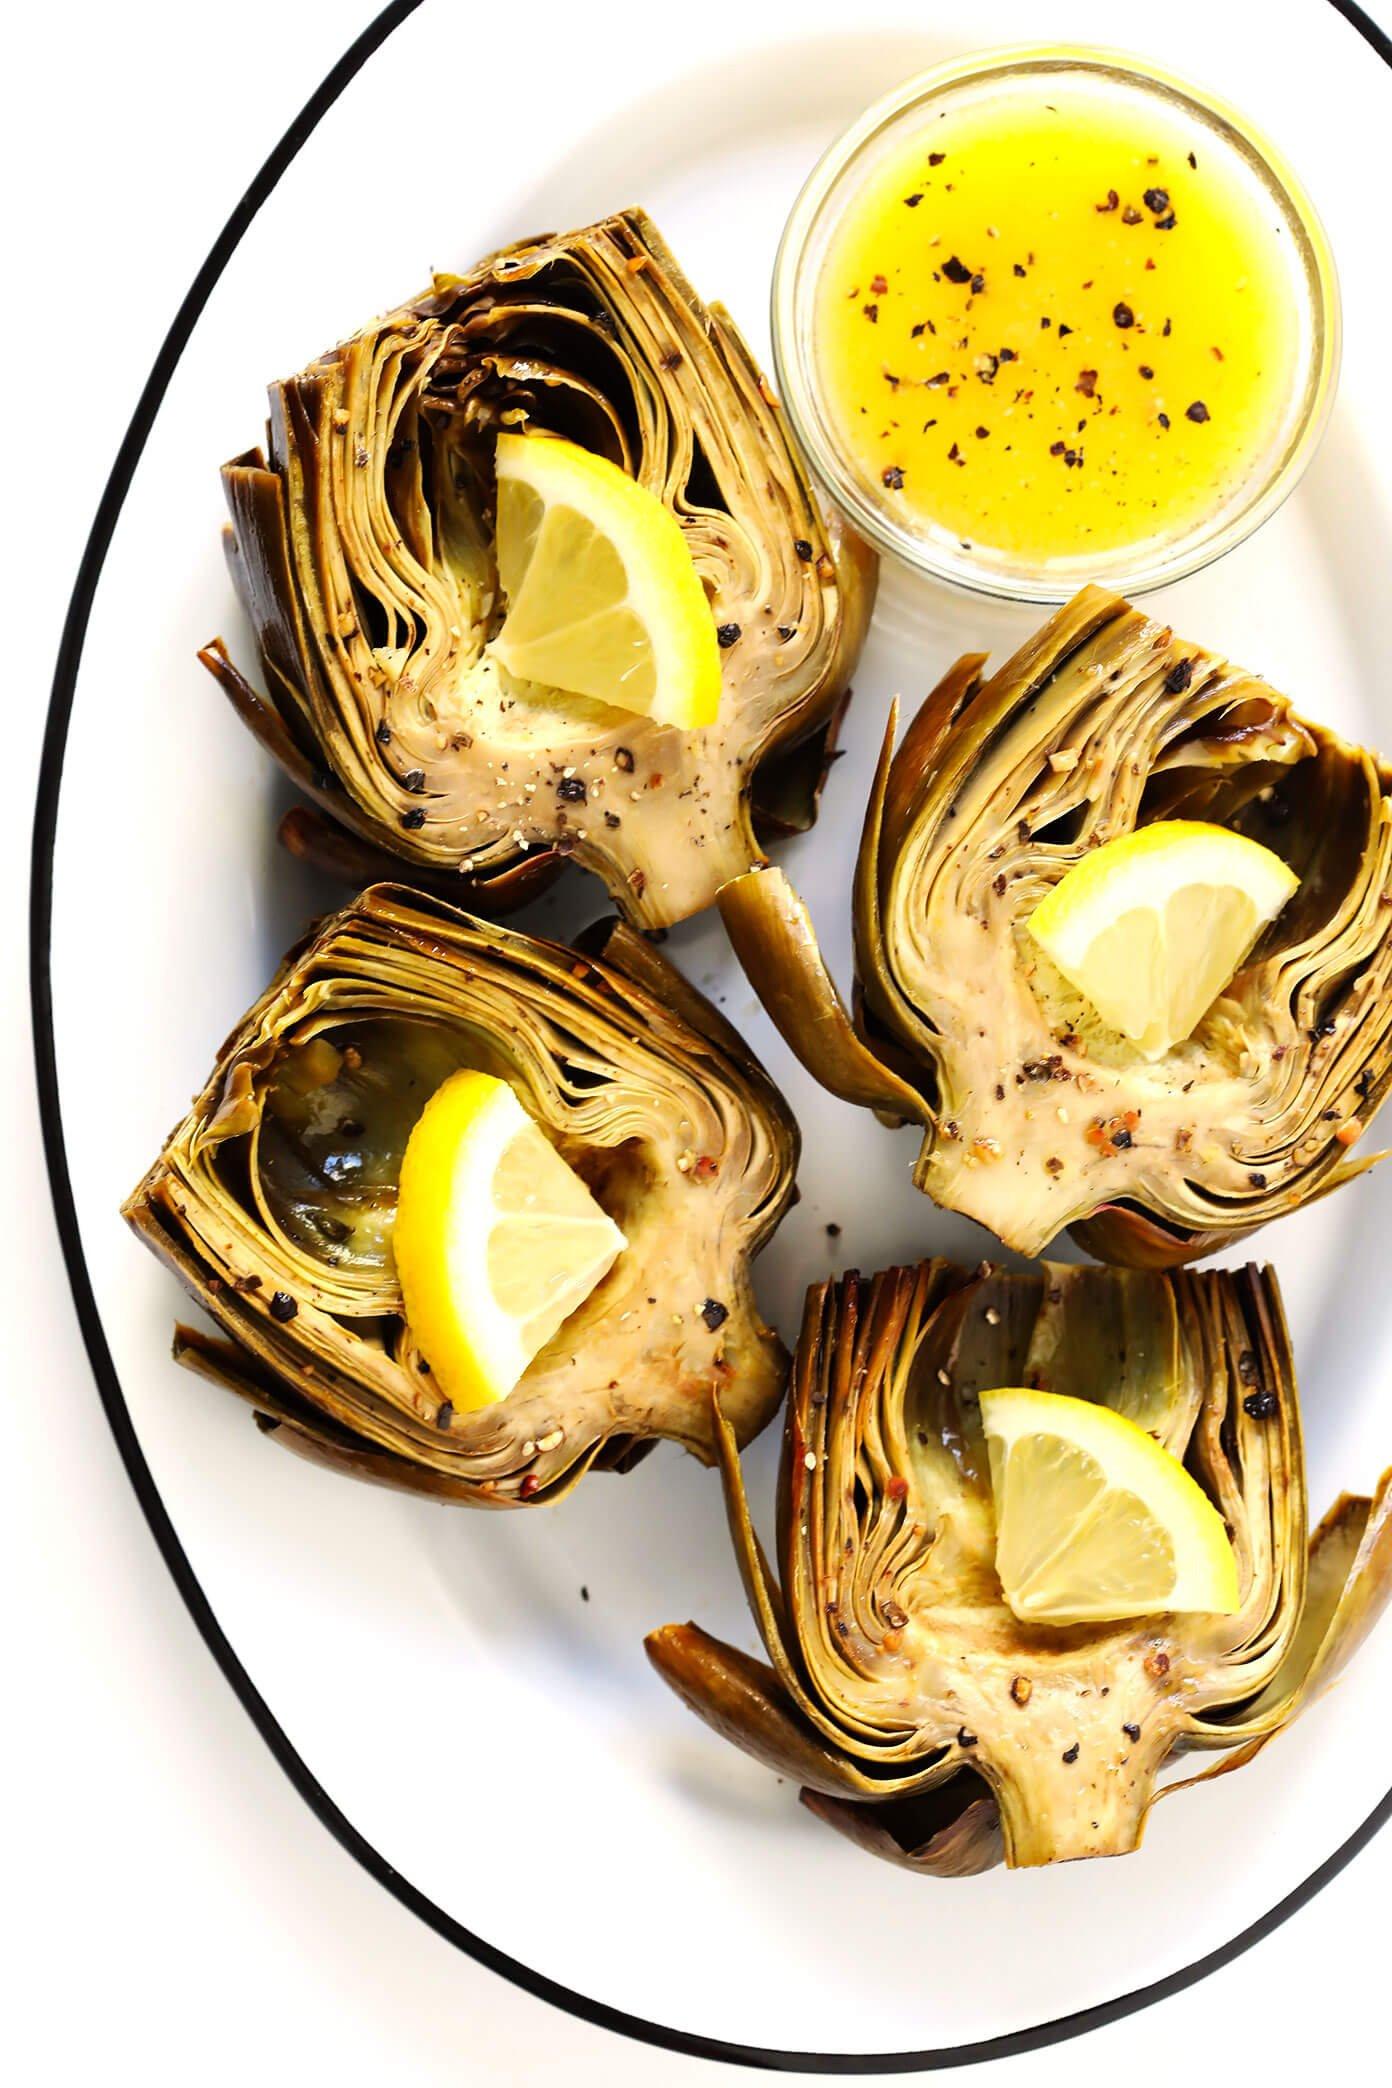 Oven Roasted Artichokes with Lemon Butter Sauce